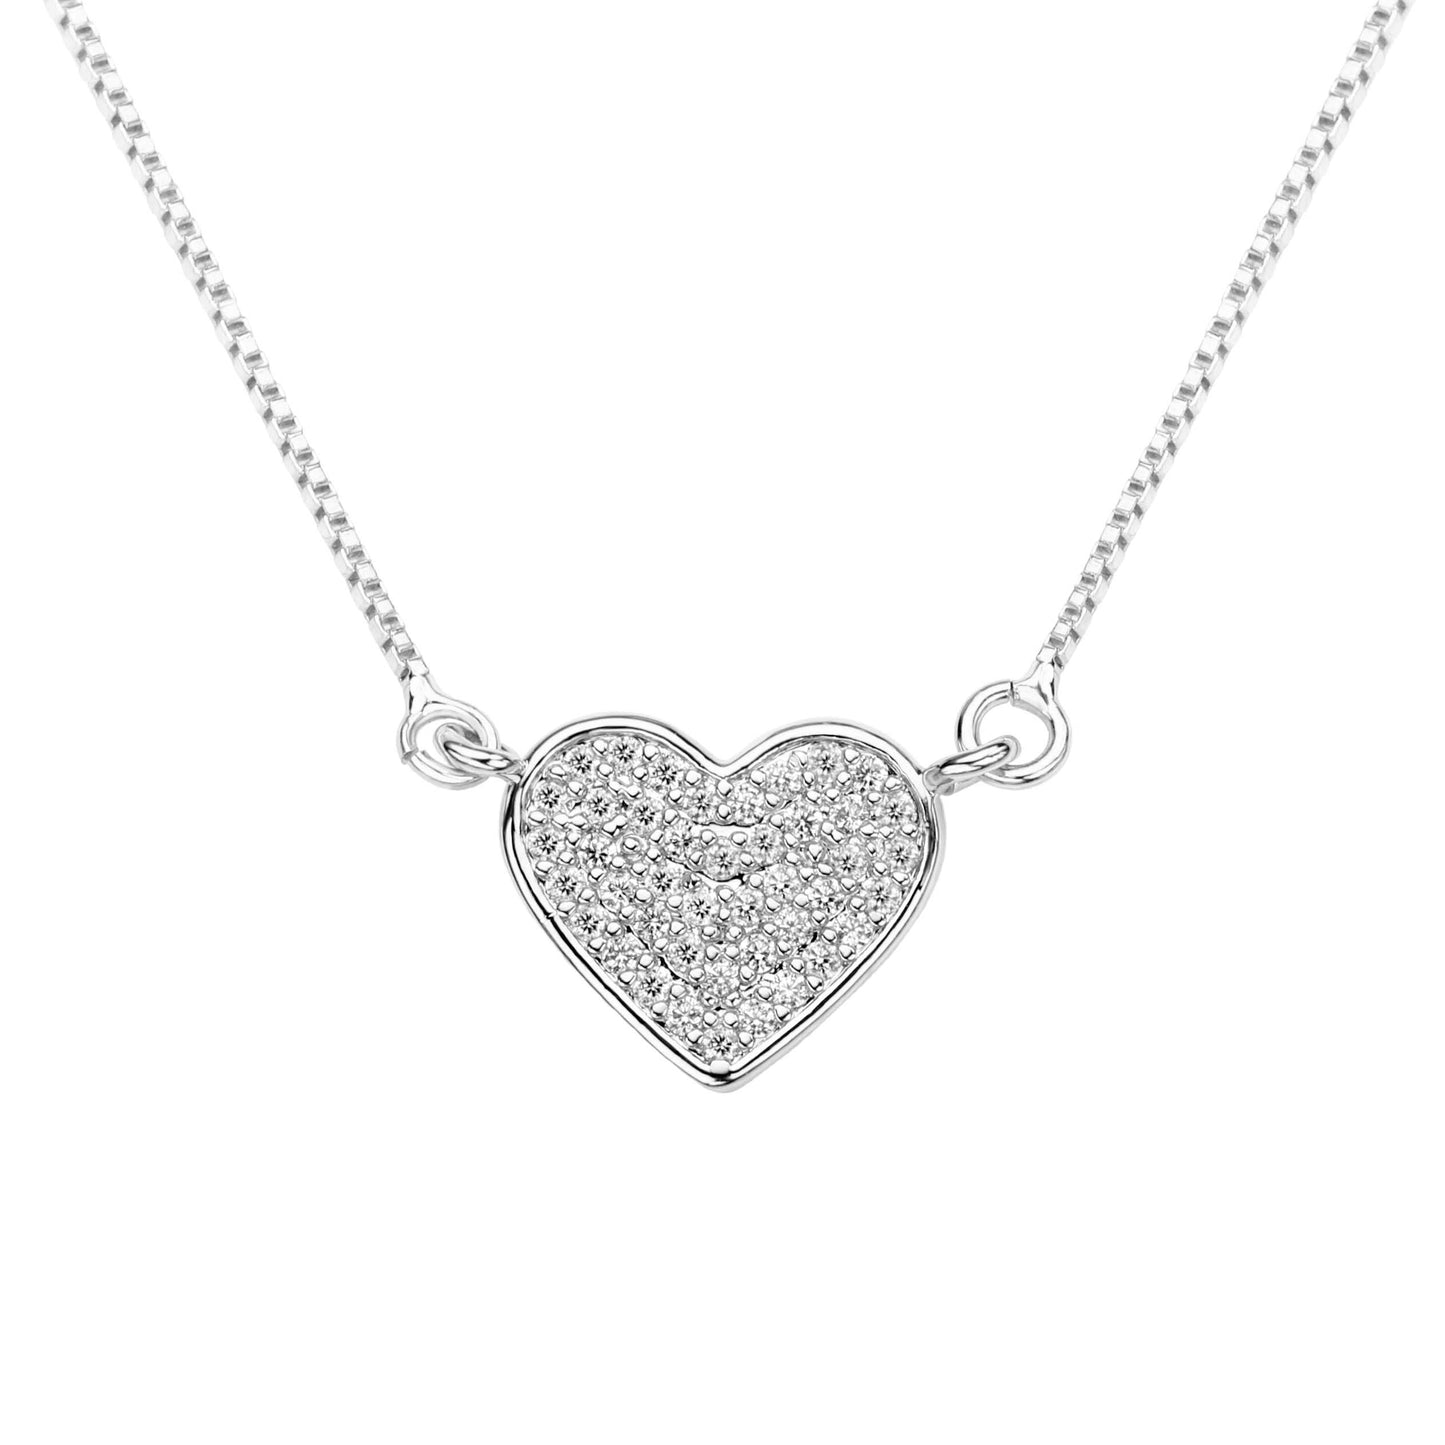 SMALL HEART NECKLACE | Double White Rhodium Plated